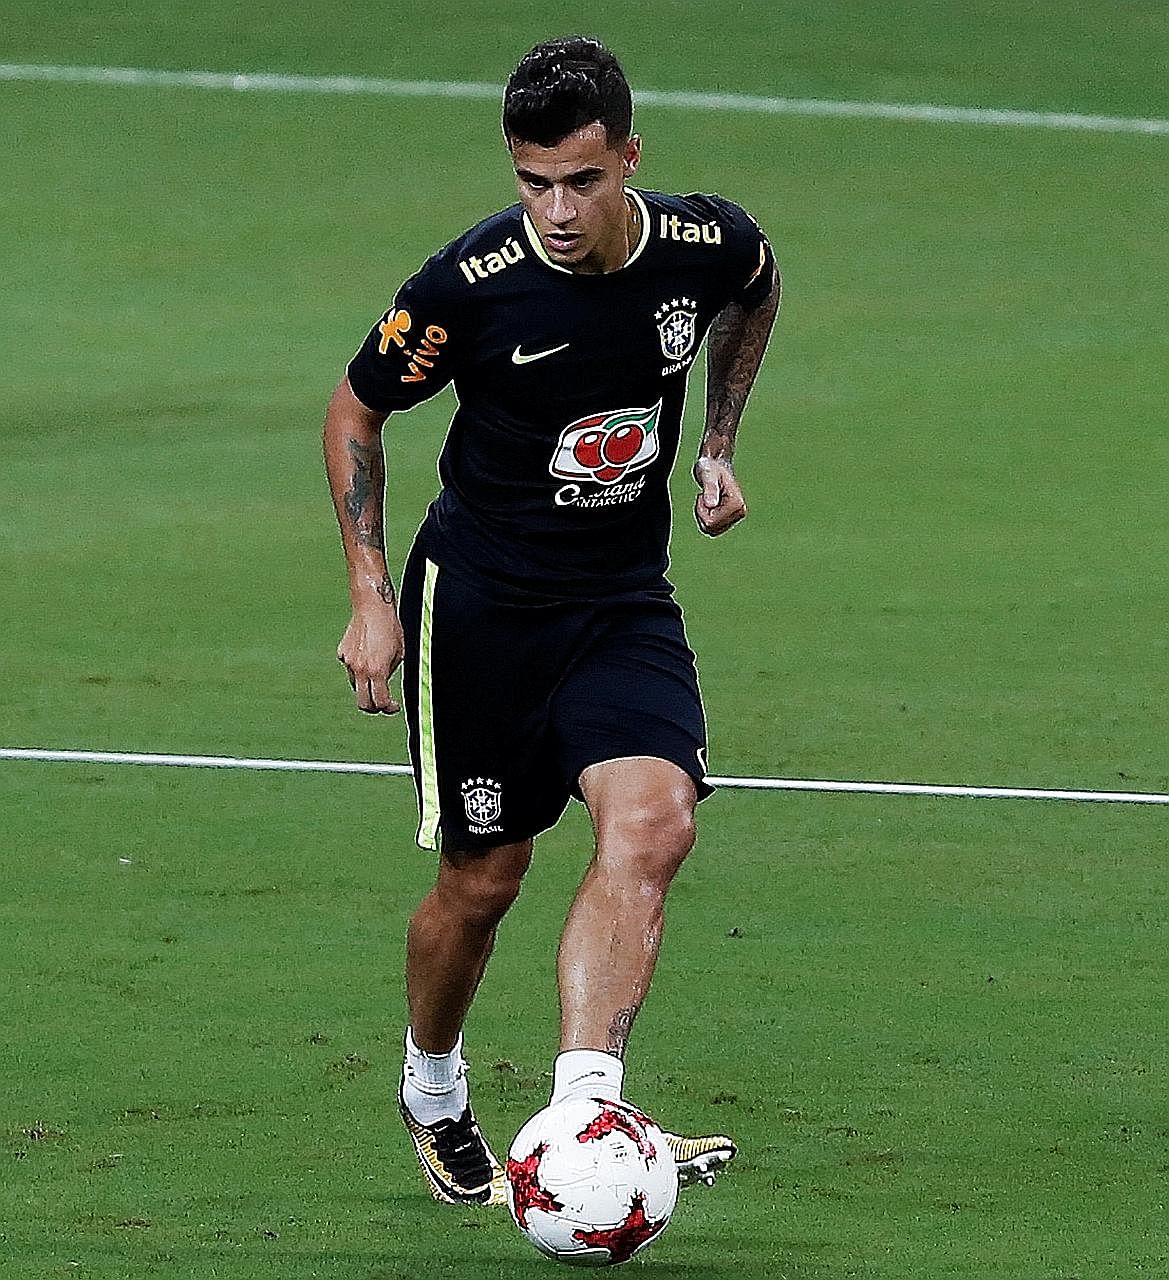 Philippe Coutinho training ahead of Brazil's World Cup qualifier against Colombia tomorrow. Having failed to obtain a move to Barcelona, he will need to work his way back into Liverpool's first team as they have impressed without him.